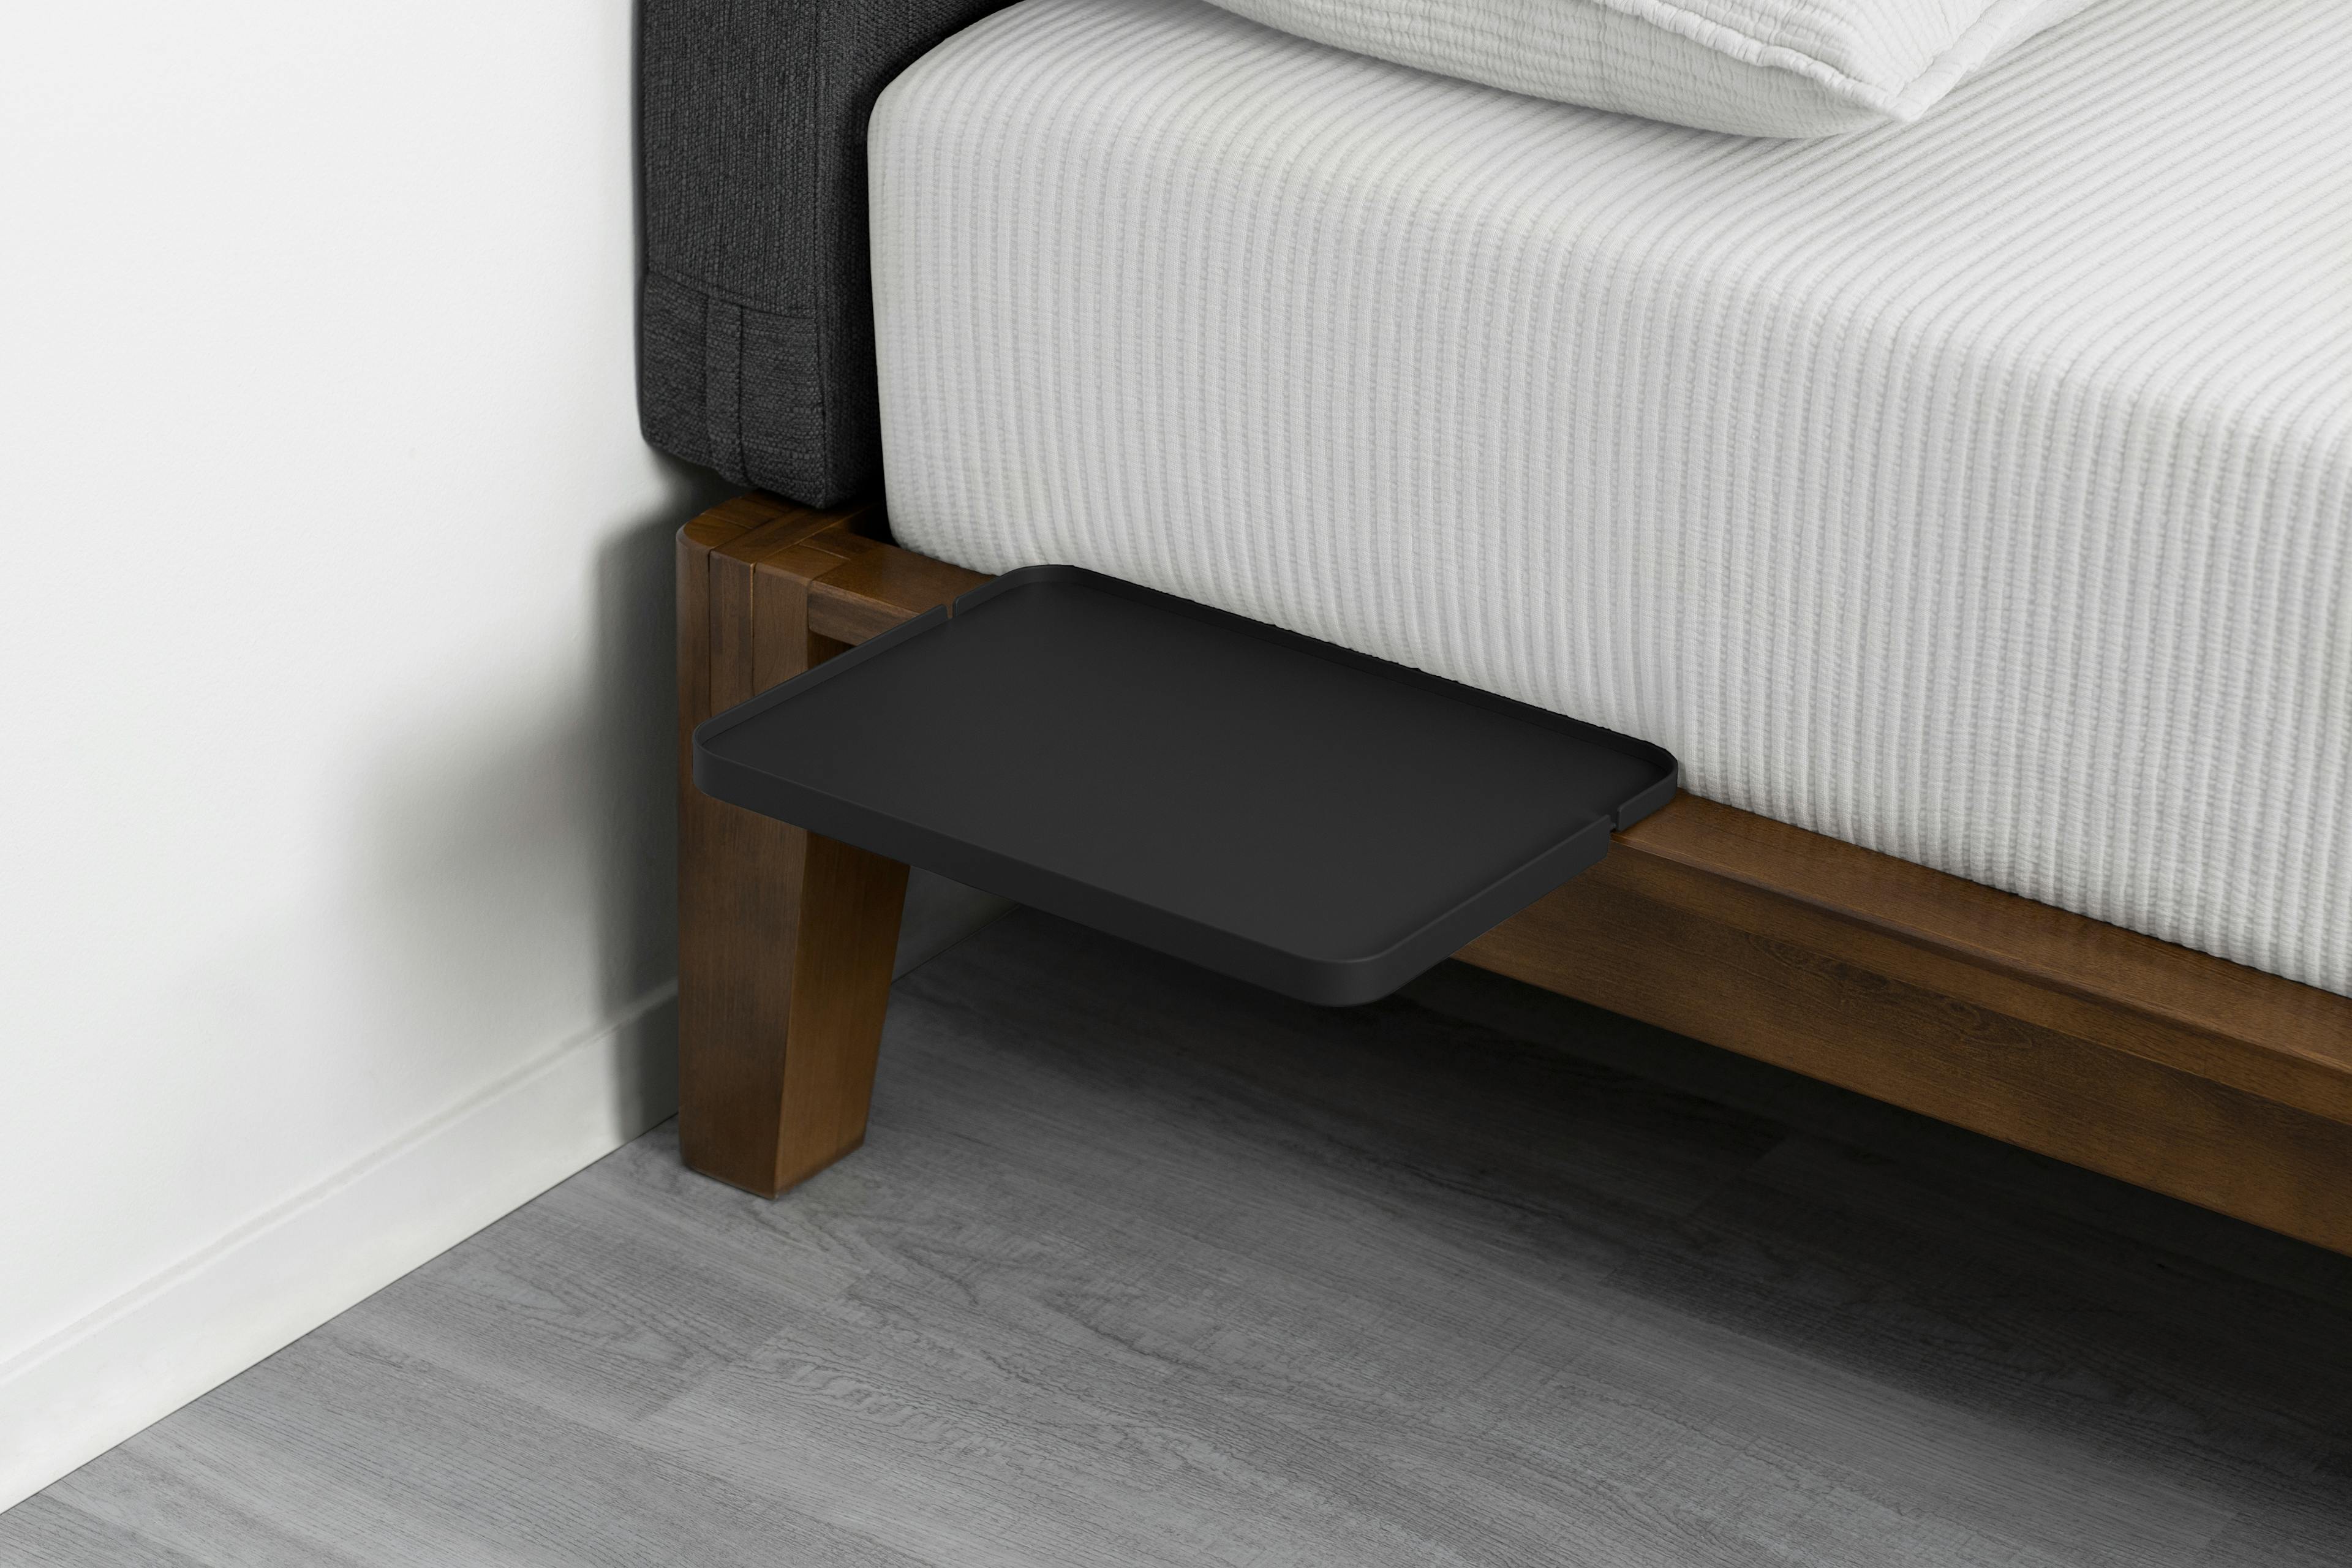 The Tray in Matte Black on a Bed